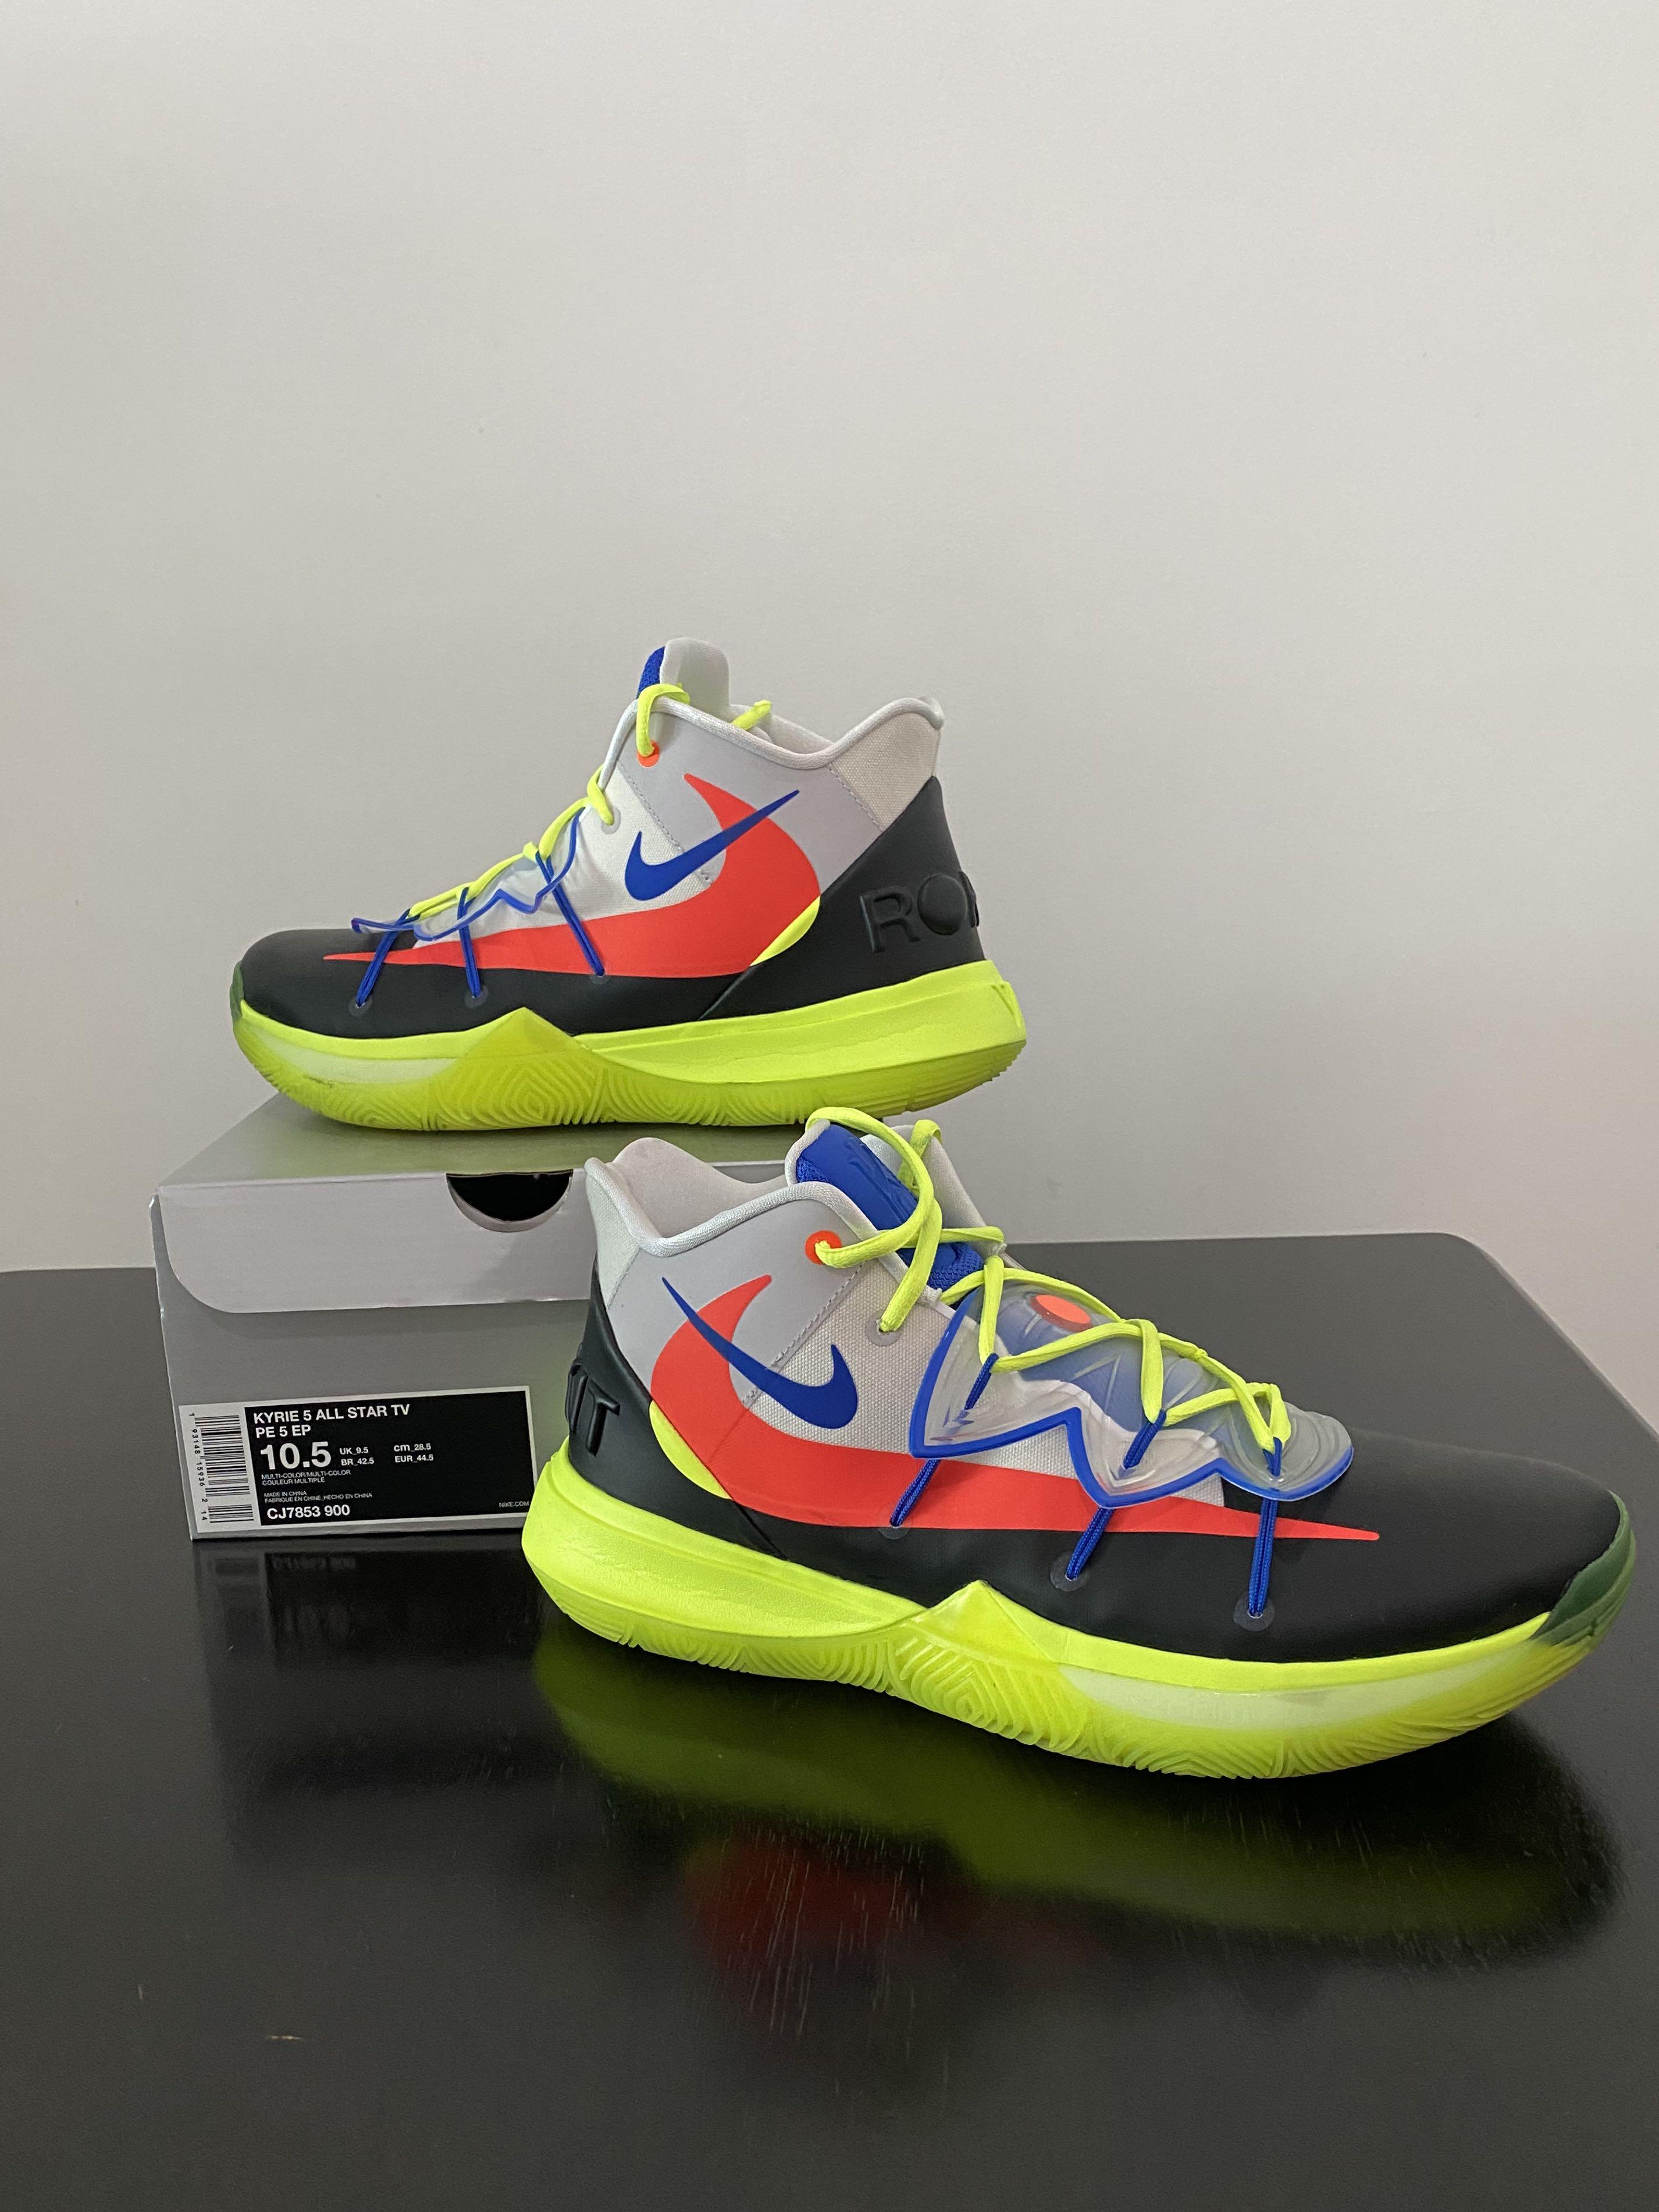 Nike Kyrie 5 EP irving 5 generation combat basketball shoes